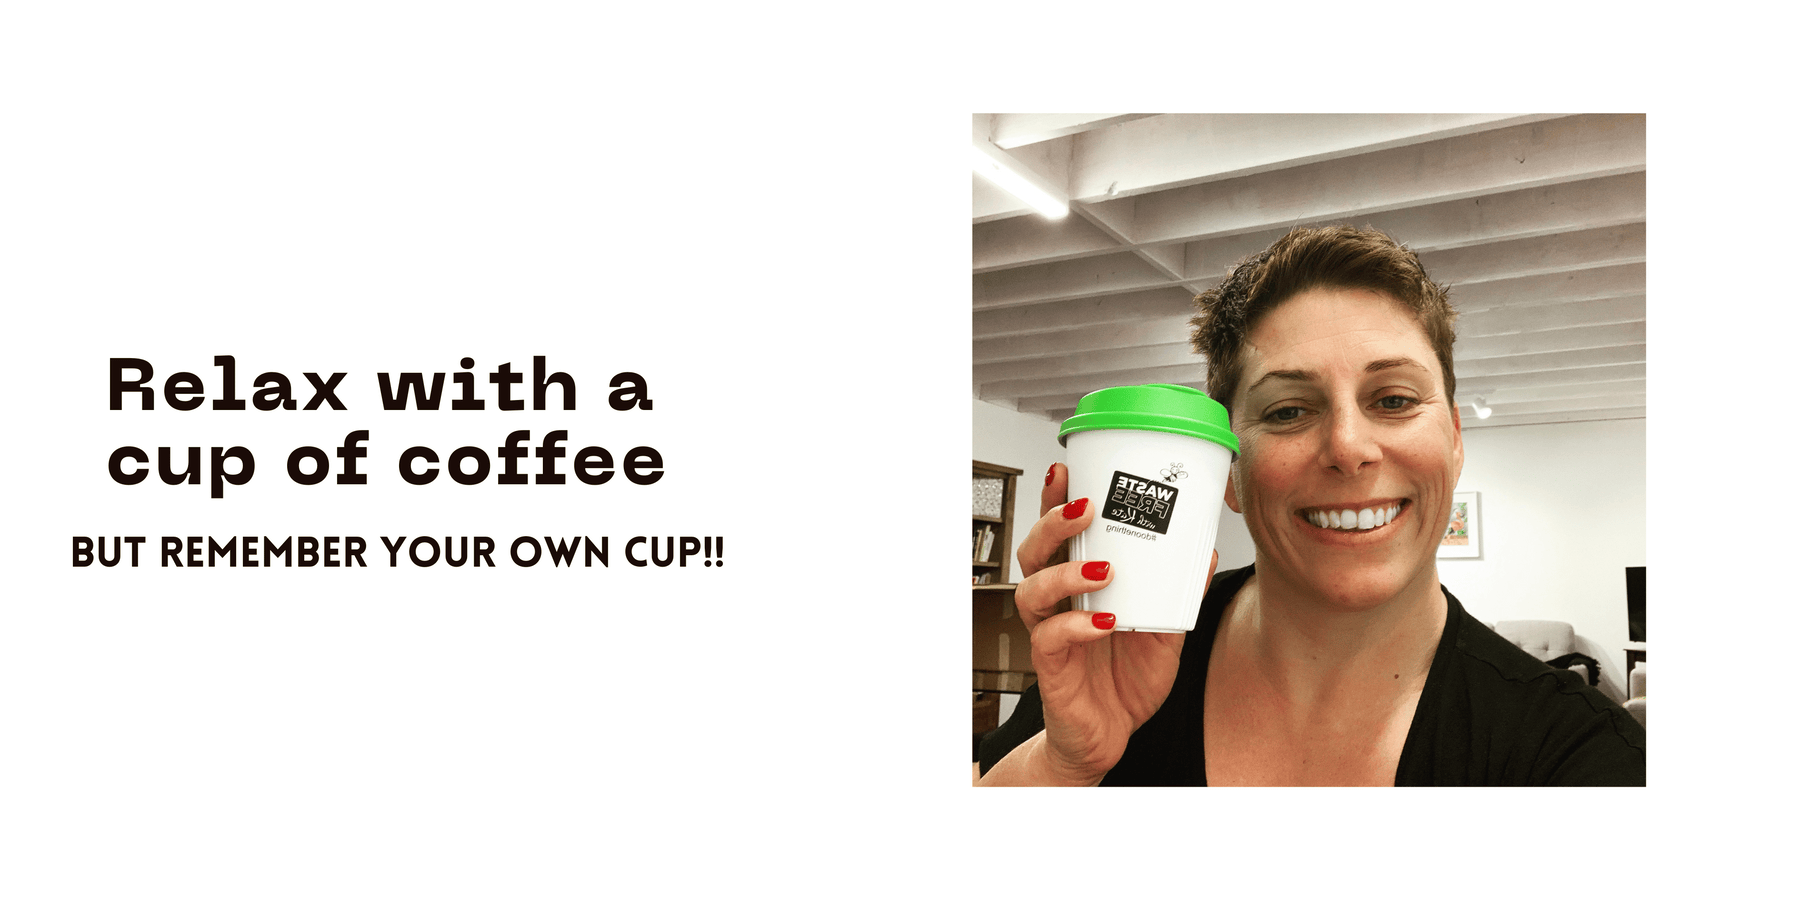 Reusable Coffee Cups - A simple change